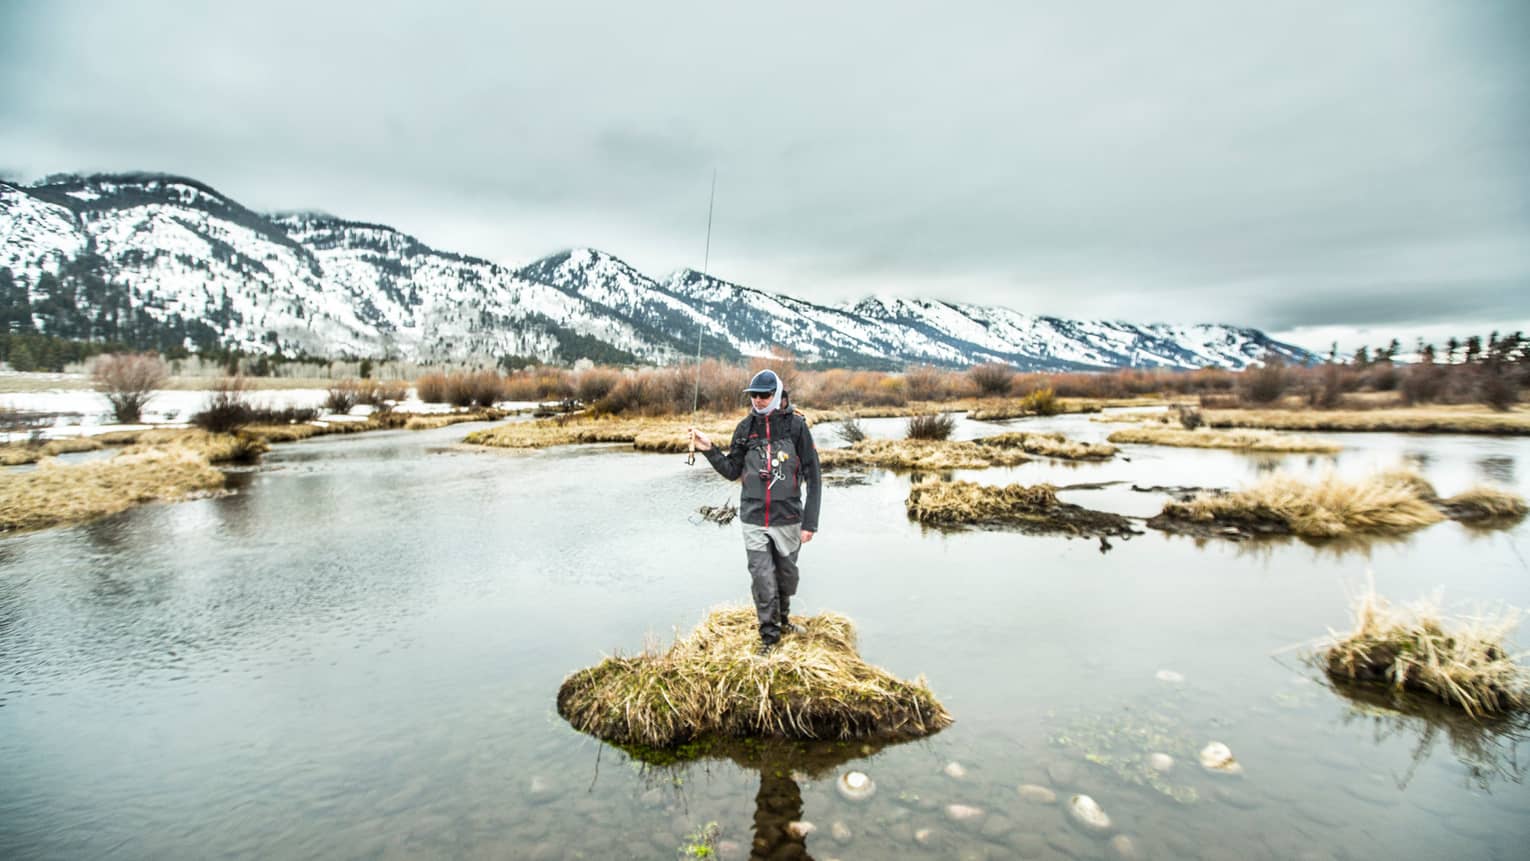 A man standing on a small piece of land surrounded by water holding a fishing rod.